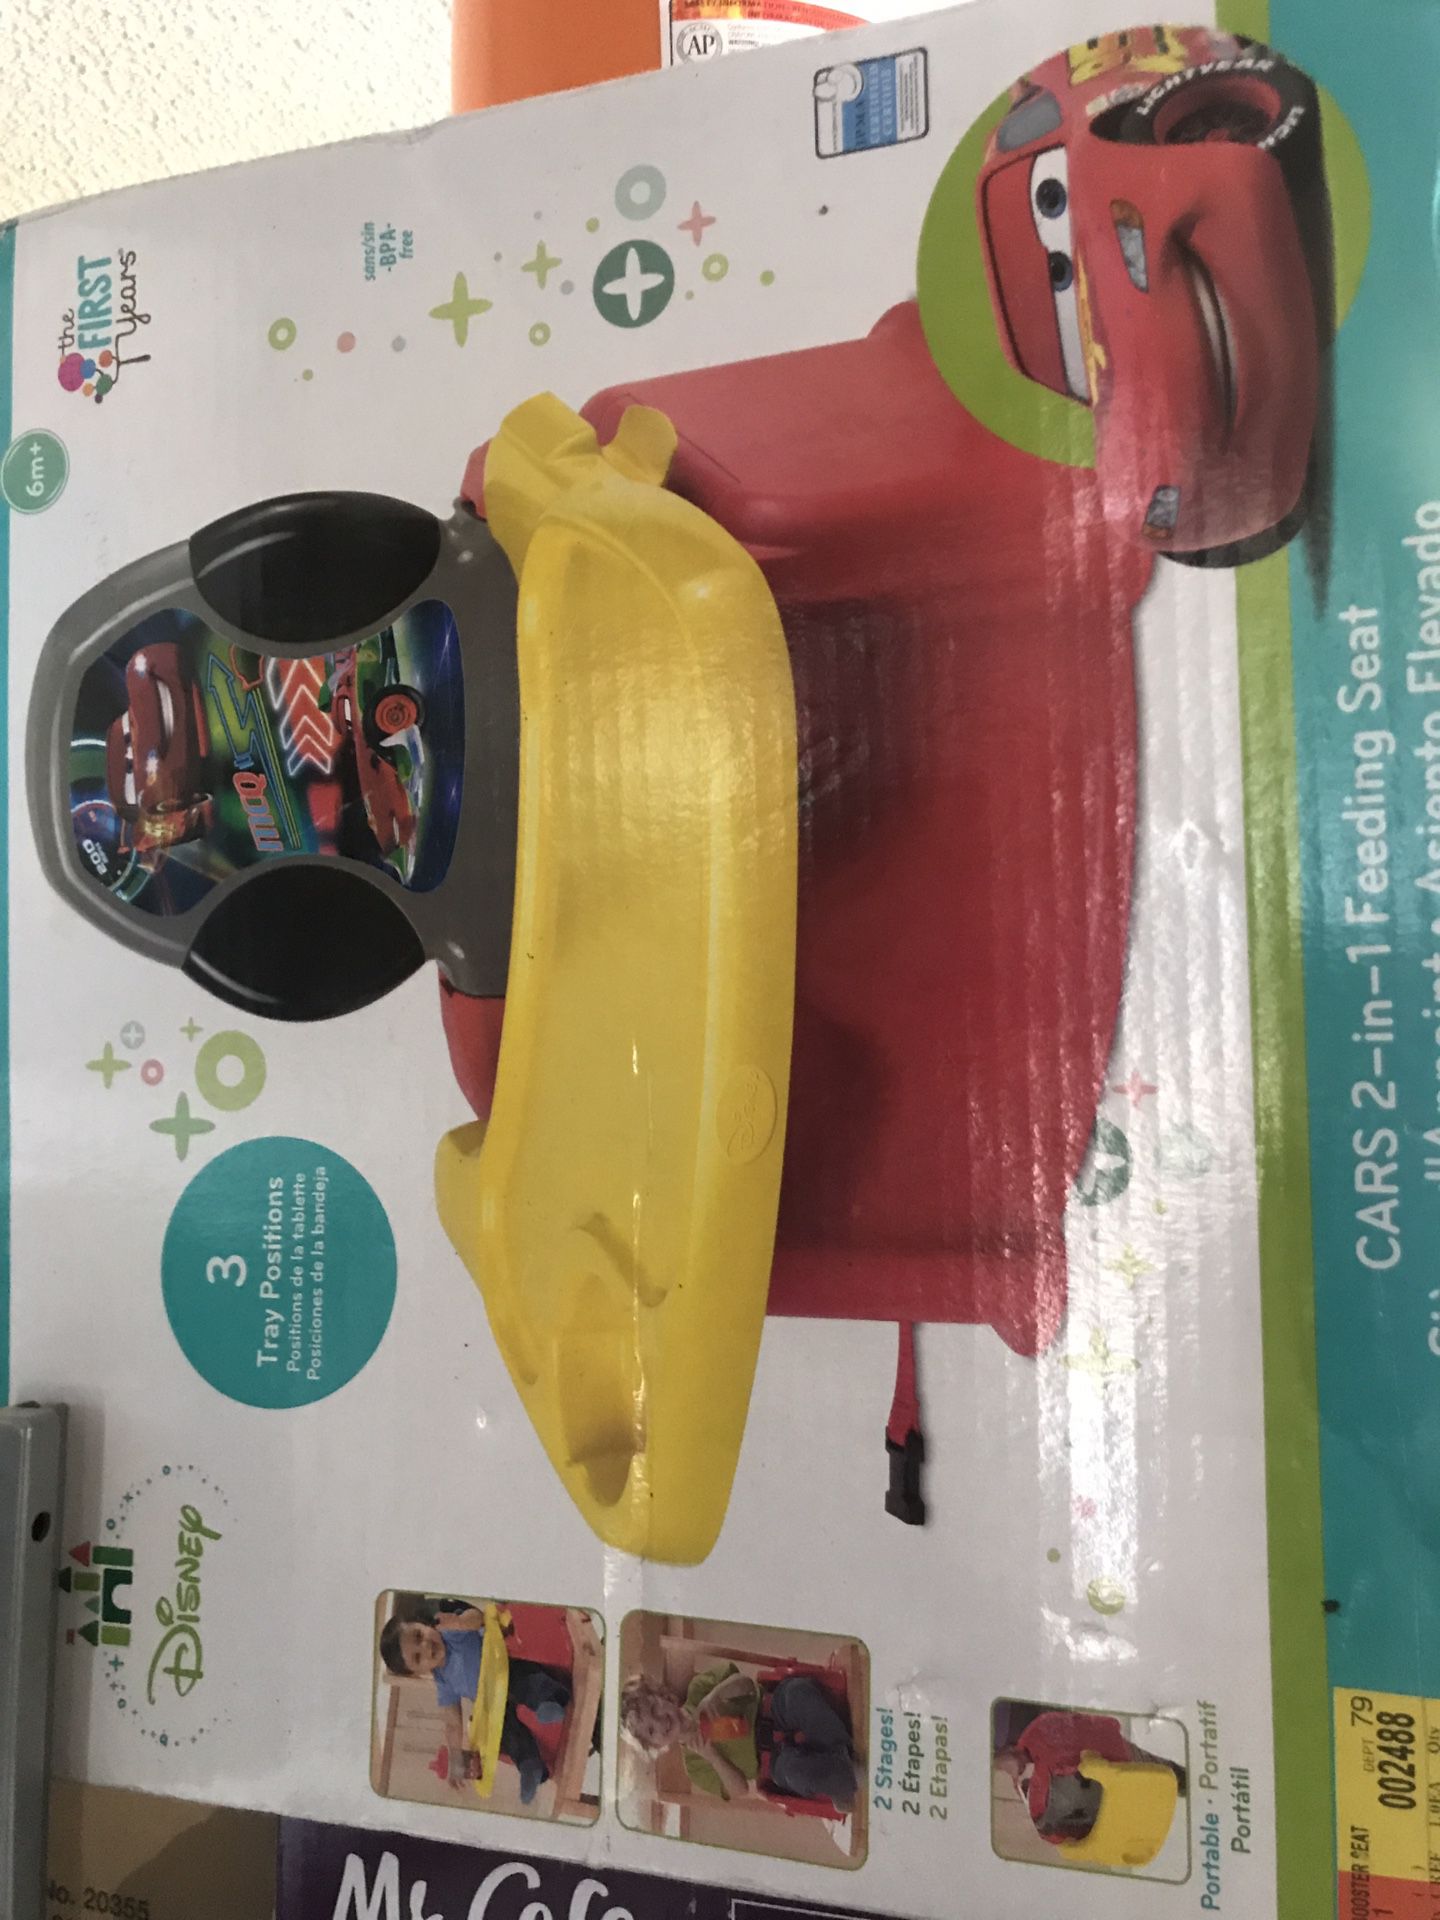 Cars booster seat